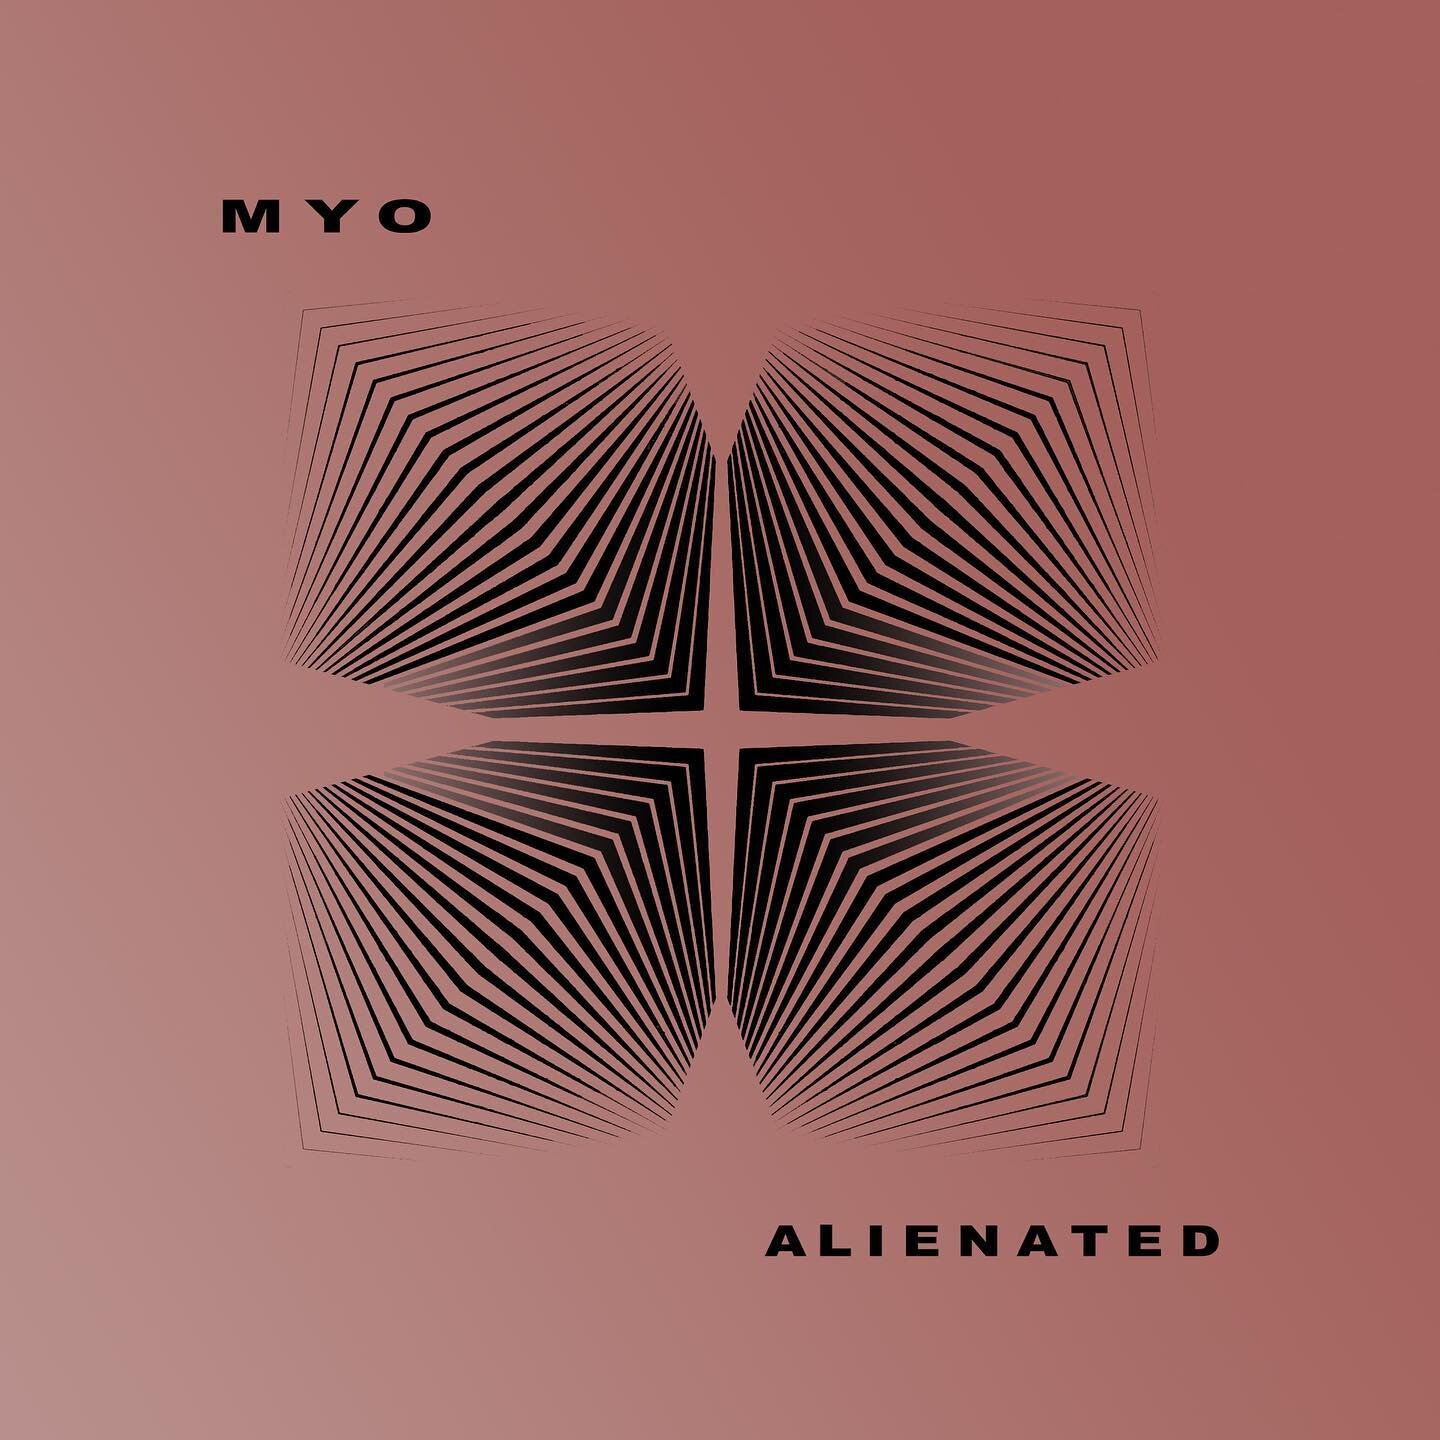 Out today, the first single from our EP which is out next month! Links to stream in our bio 🧡🧡
.
.
.
.
#newmusicfriday #newmusic #myo #music #electronicdancemusic #electronicmusic #popmusic #albumart #geometricart #geometric #singlerelease #london